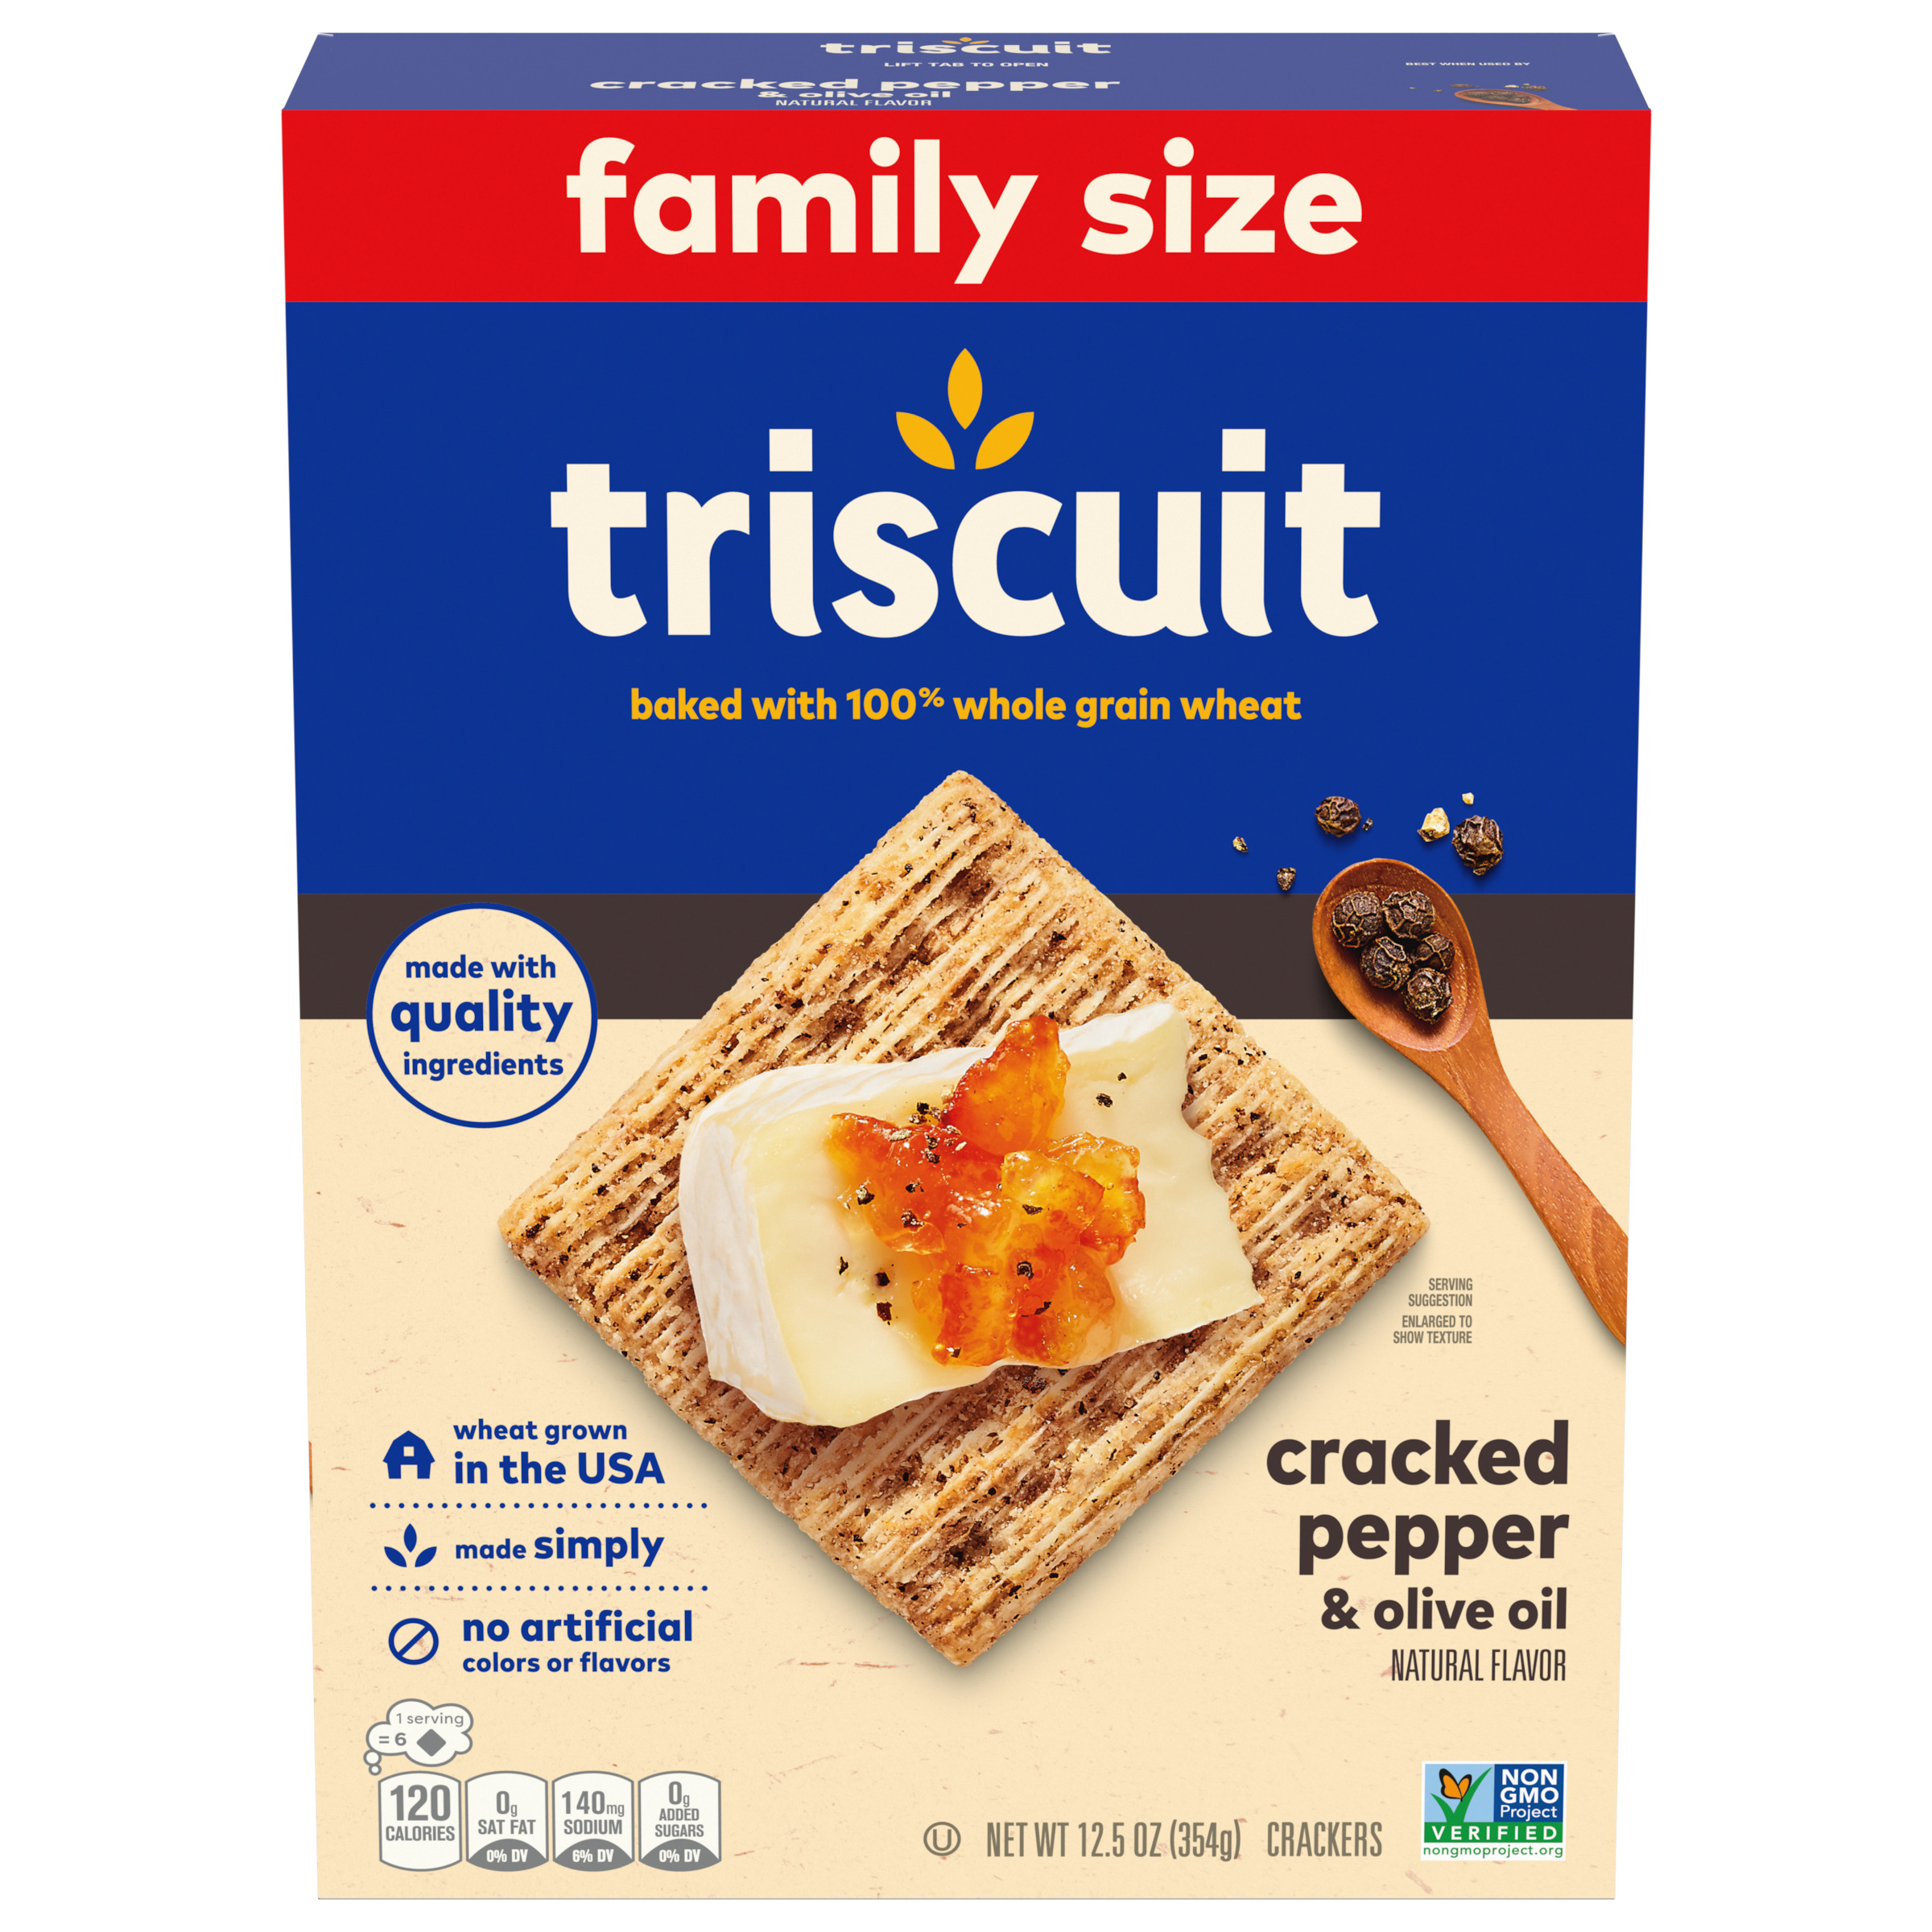 Triscuit Cracked Pepper & Olive Oil Whole Grain Wheat Crackers, Family Size, 12.5 oz-1